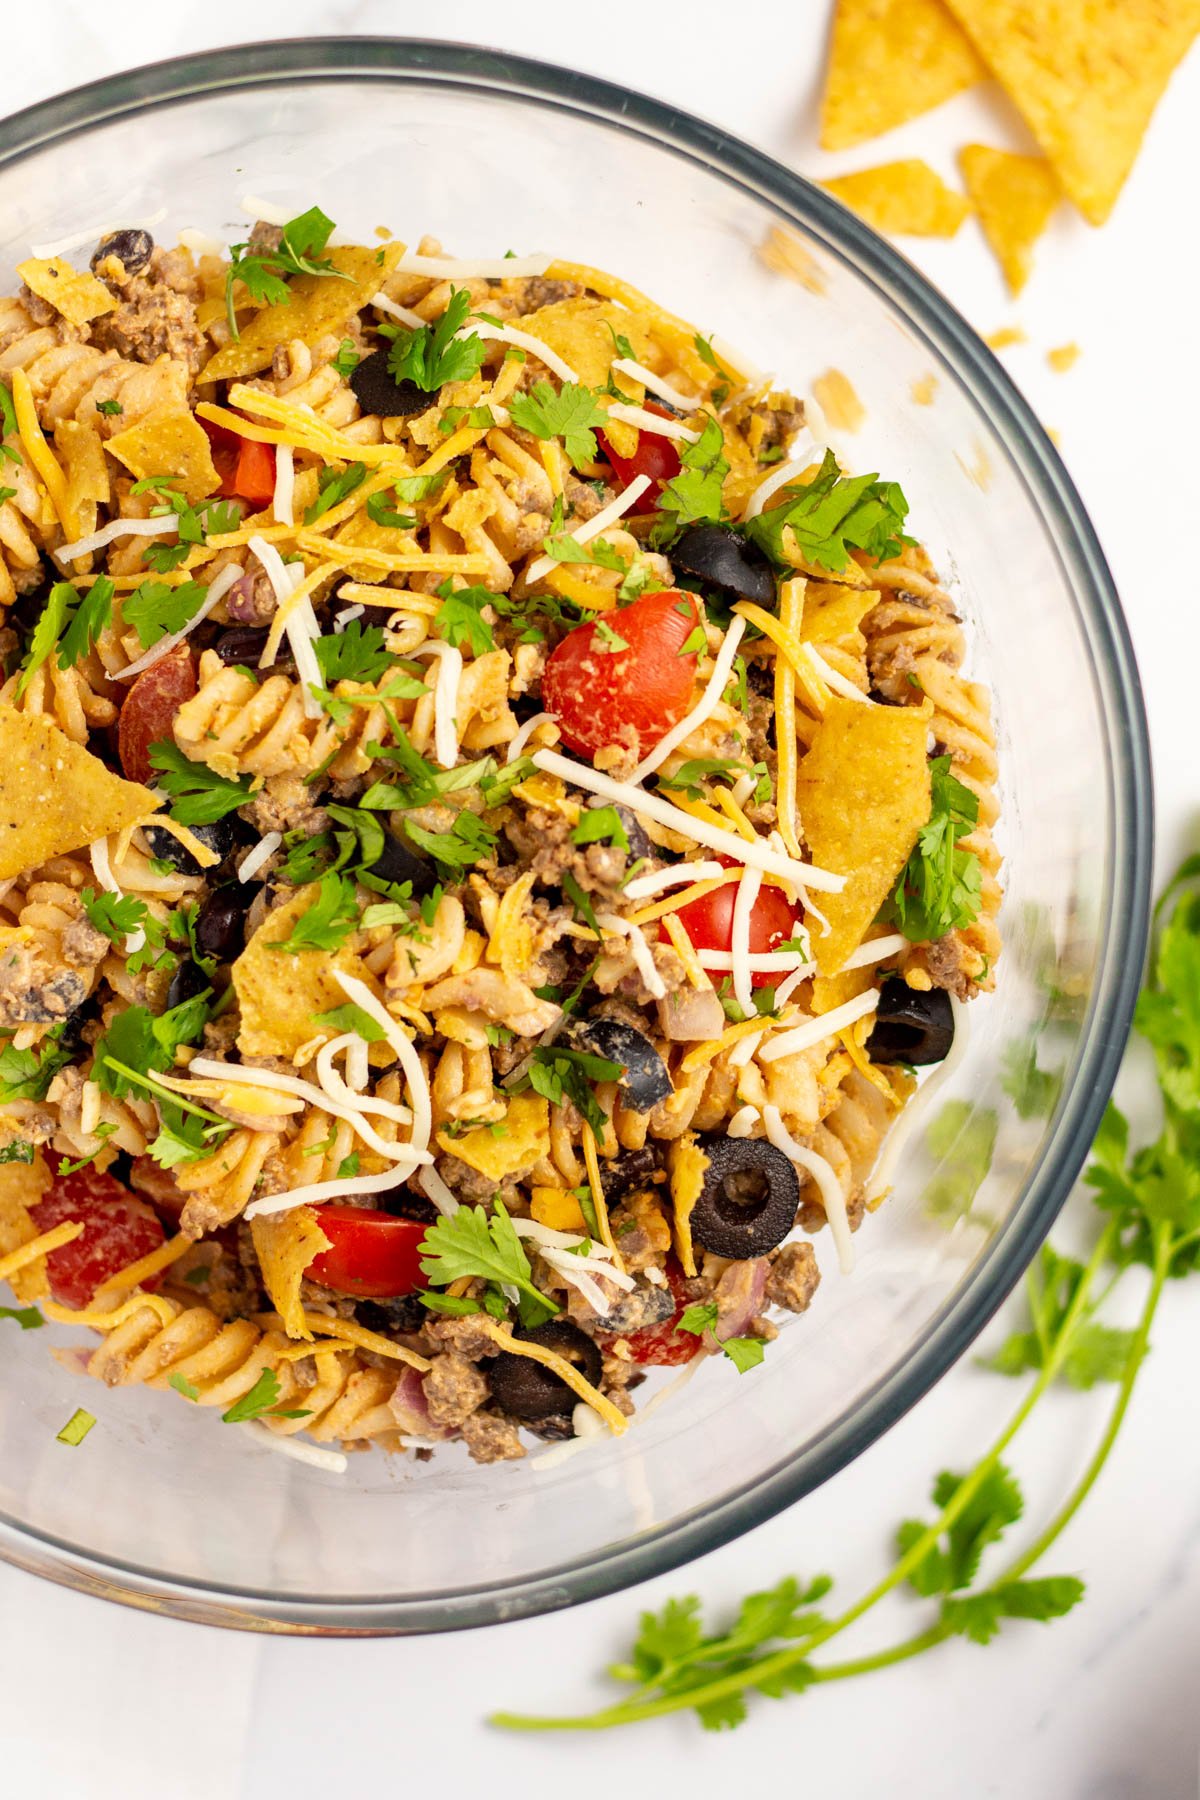 This quick and easy salad is ready in under thirty minutes and will definitely hit the spot! It's full of all the fresh flavors of taco night packed into a simple, delicious, pasta salad. The taco pasta salad is a breeze to make gluten free and is a perfect side for any meal, potluck, or family gathering. #tacosalad #pastasalad #glutenfree